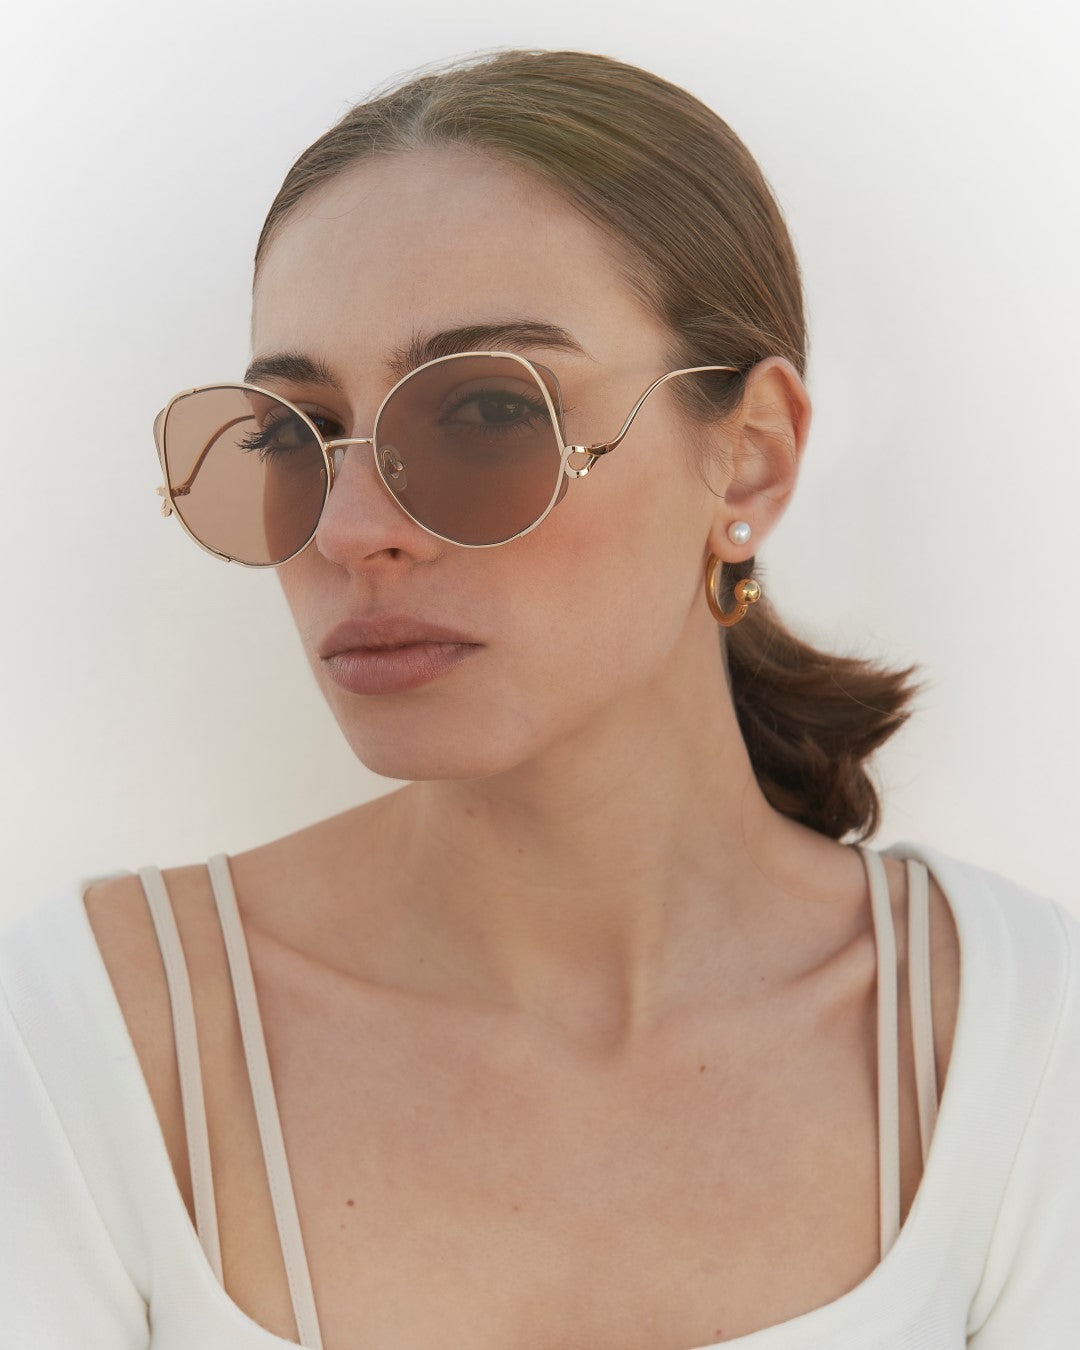 Canvas Sunglasses in Sand on a Model.